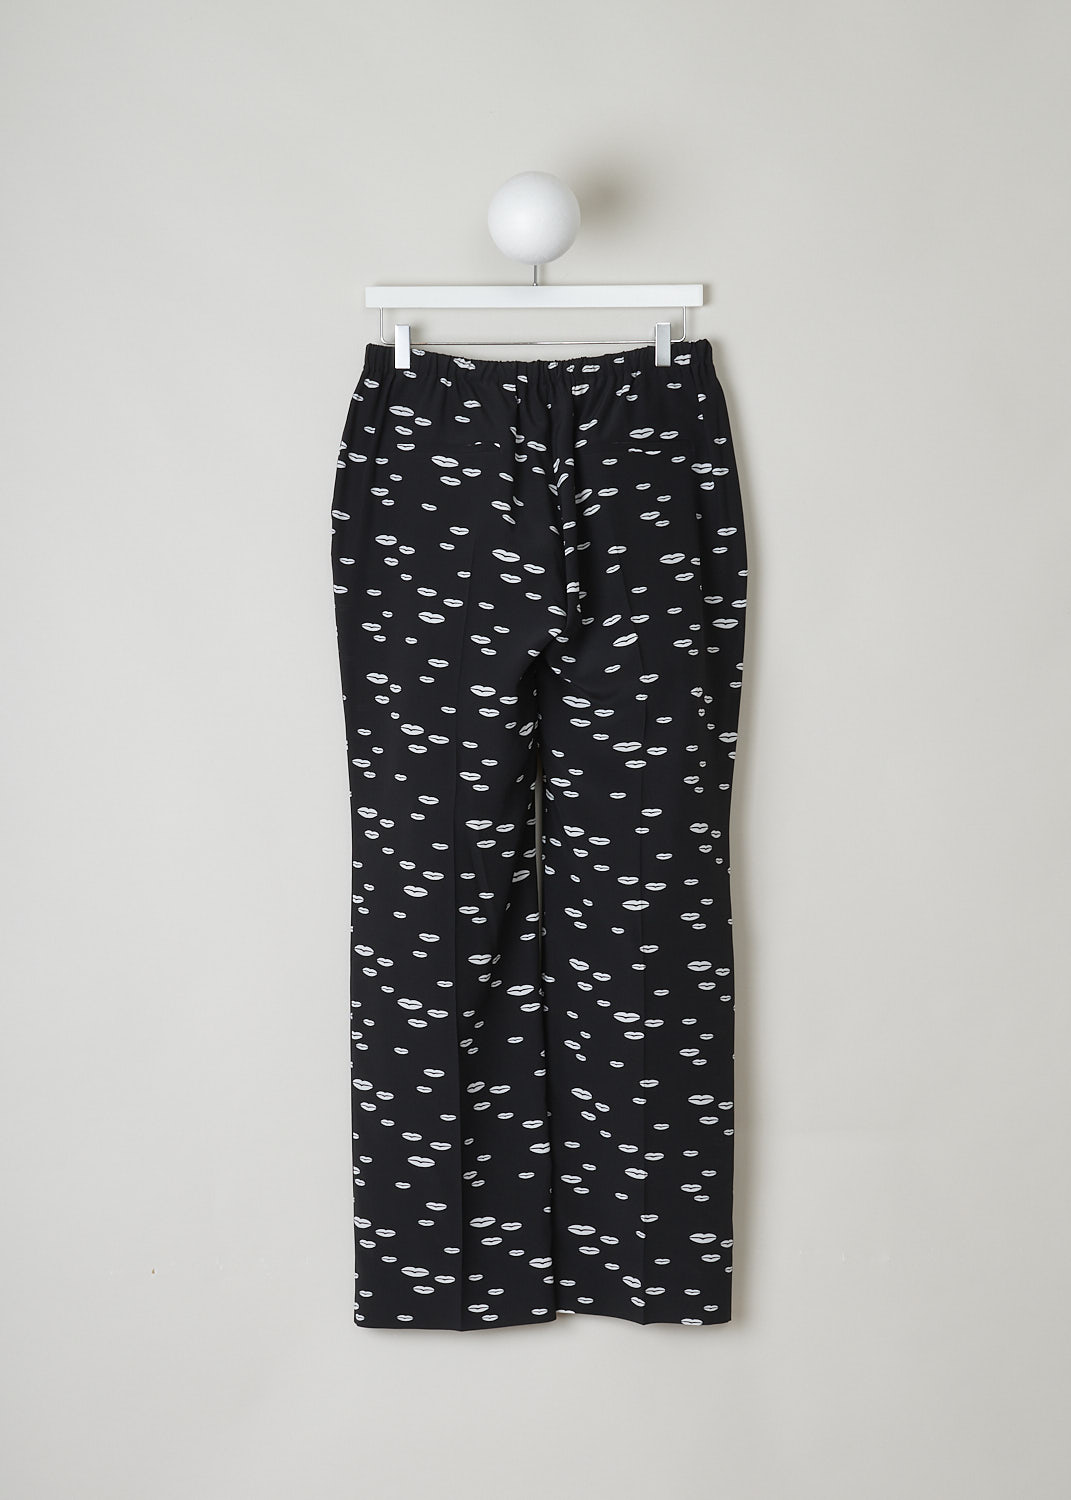 PRADA, BLACK PANTS WITH WHITE LIP PRINT, CDC_BOCCA_P235E_F057Z_NERO_AVORIO, Black, White, Print, Back, These black silk pants have an all-over lip print in white. This slip-on model has an elasticated waistline. These pants have slanted pockets in the front and welt pockets in the back. The straight pant legs have centre creases. 